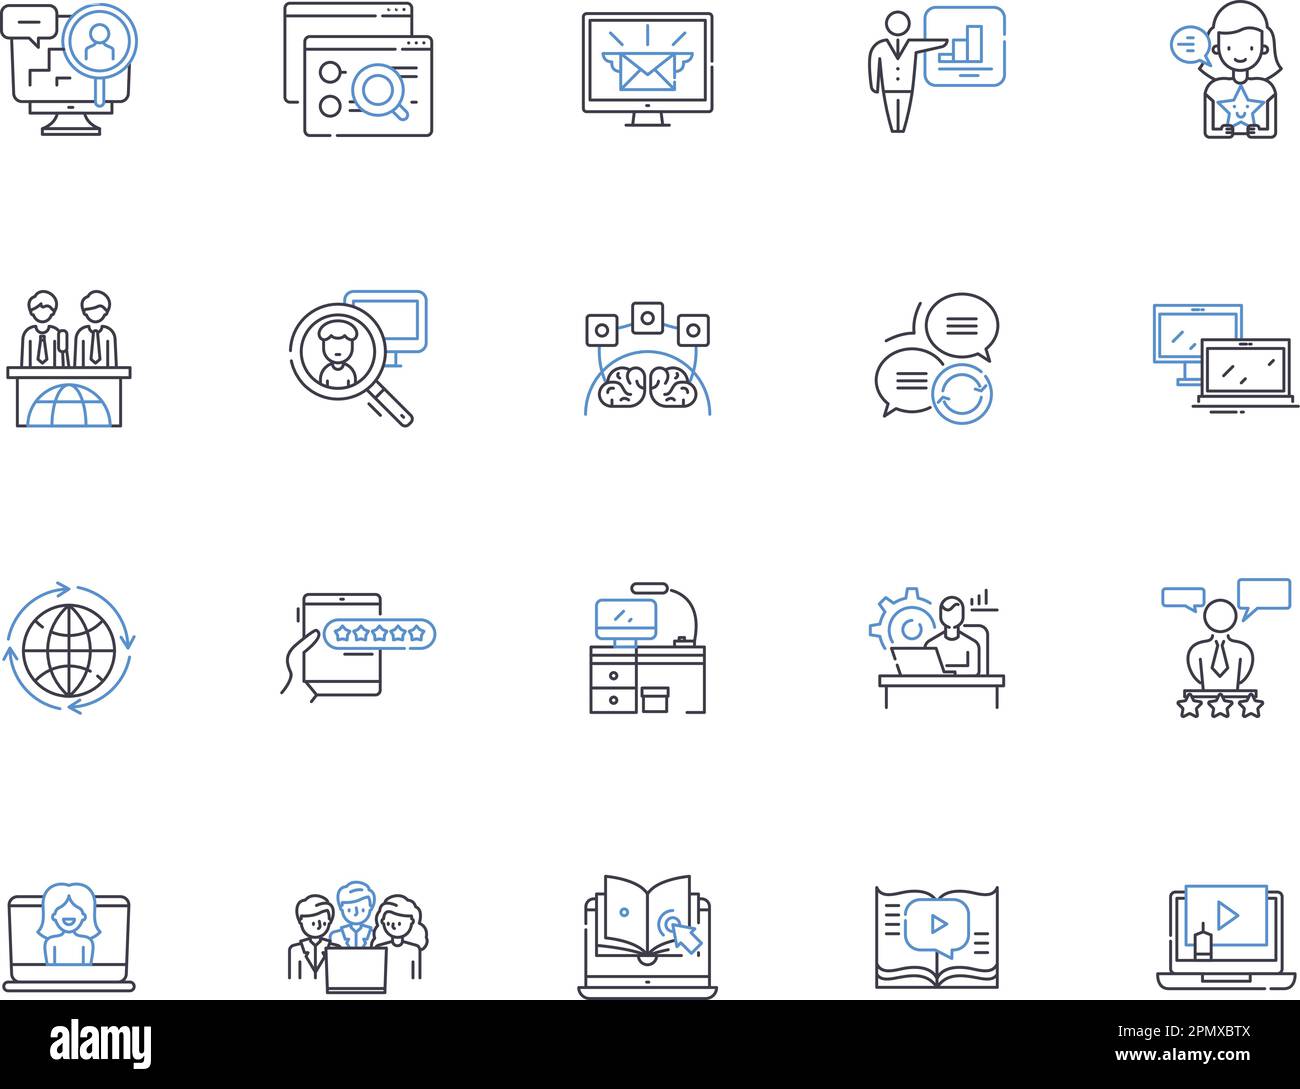 Online people outline icons collection. People, Online, Networking, Community, Connect, Chatting, Users vector and illustration concept set. Interact Stock Vector